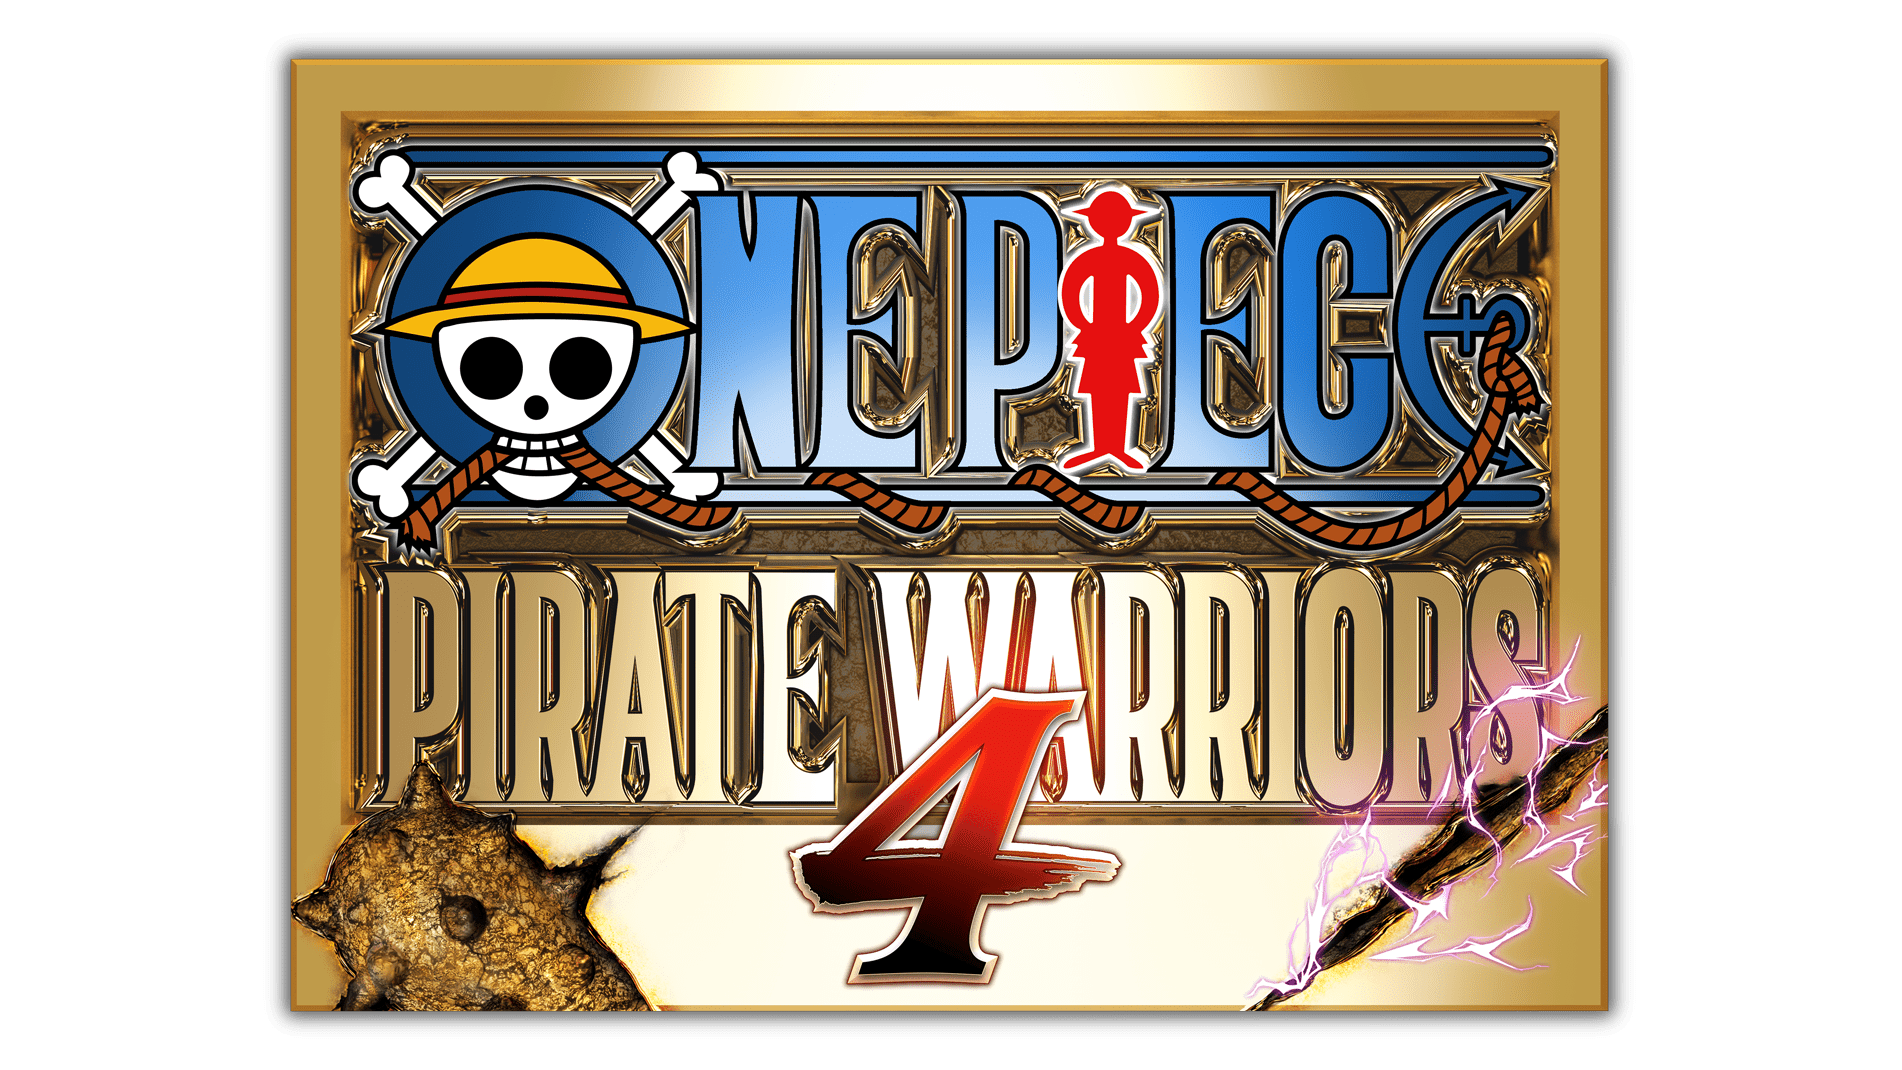 ONE PIECE: Pirate Warriors 4 out now on Xbox Game Pass! The Windows 10  version is also available today!